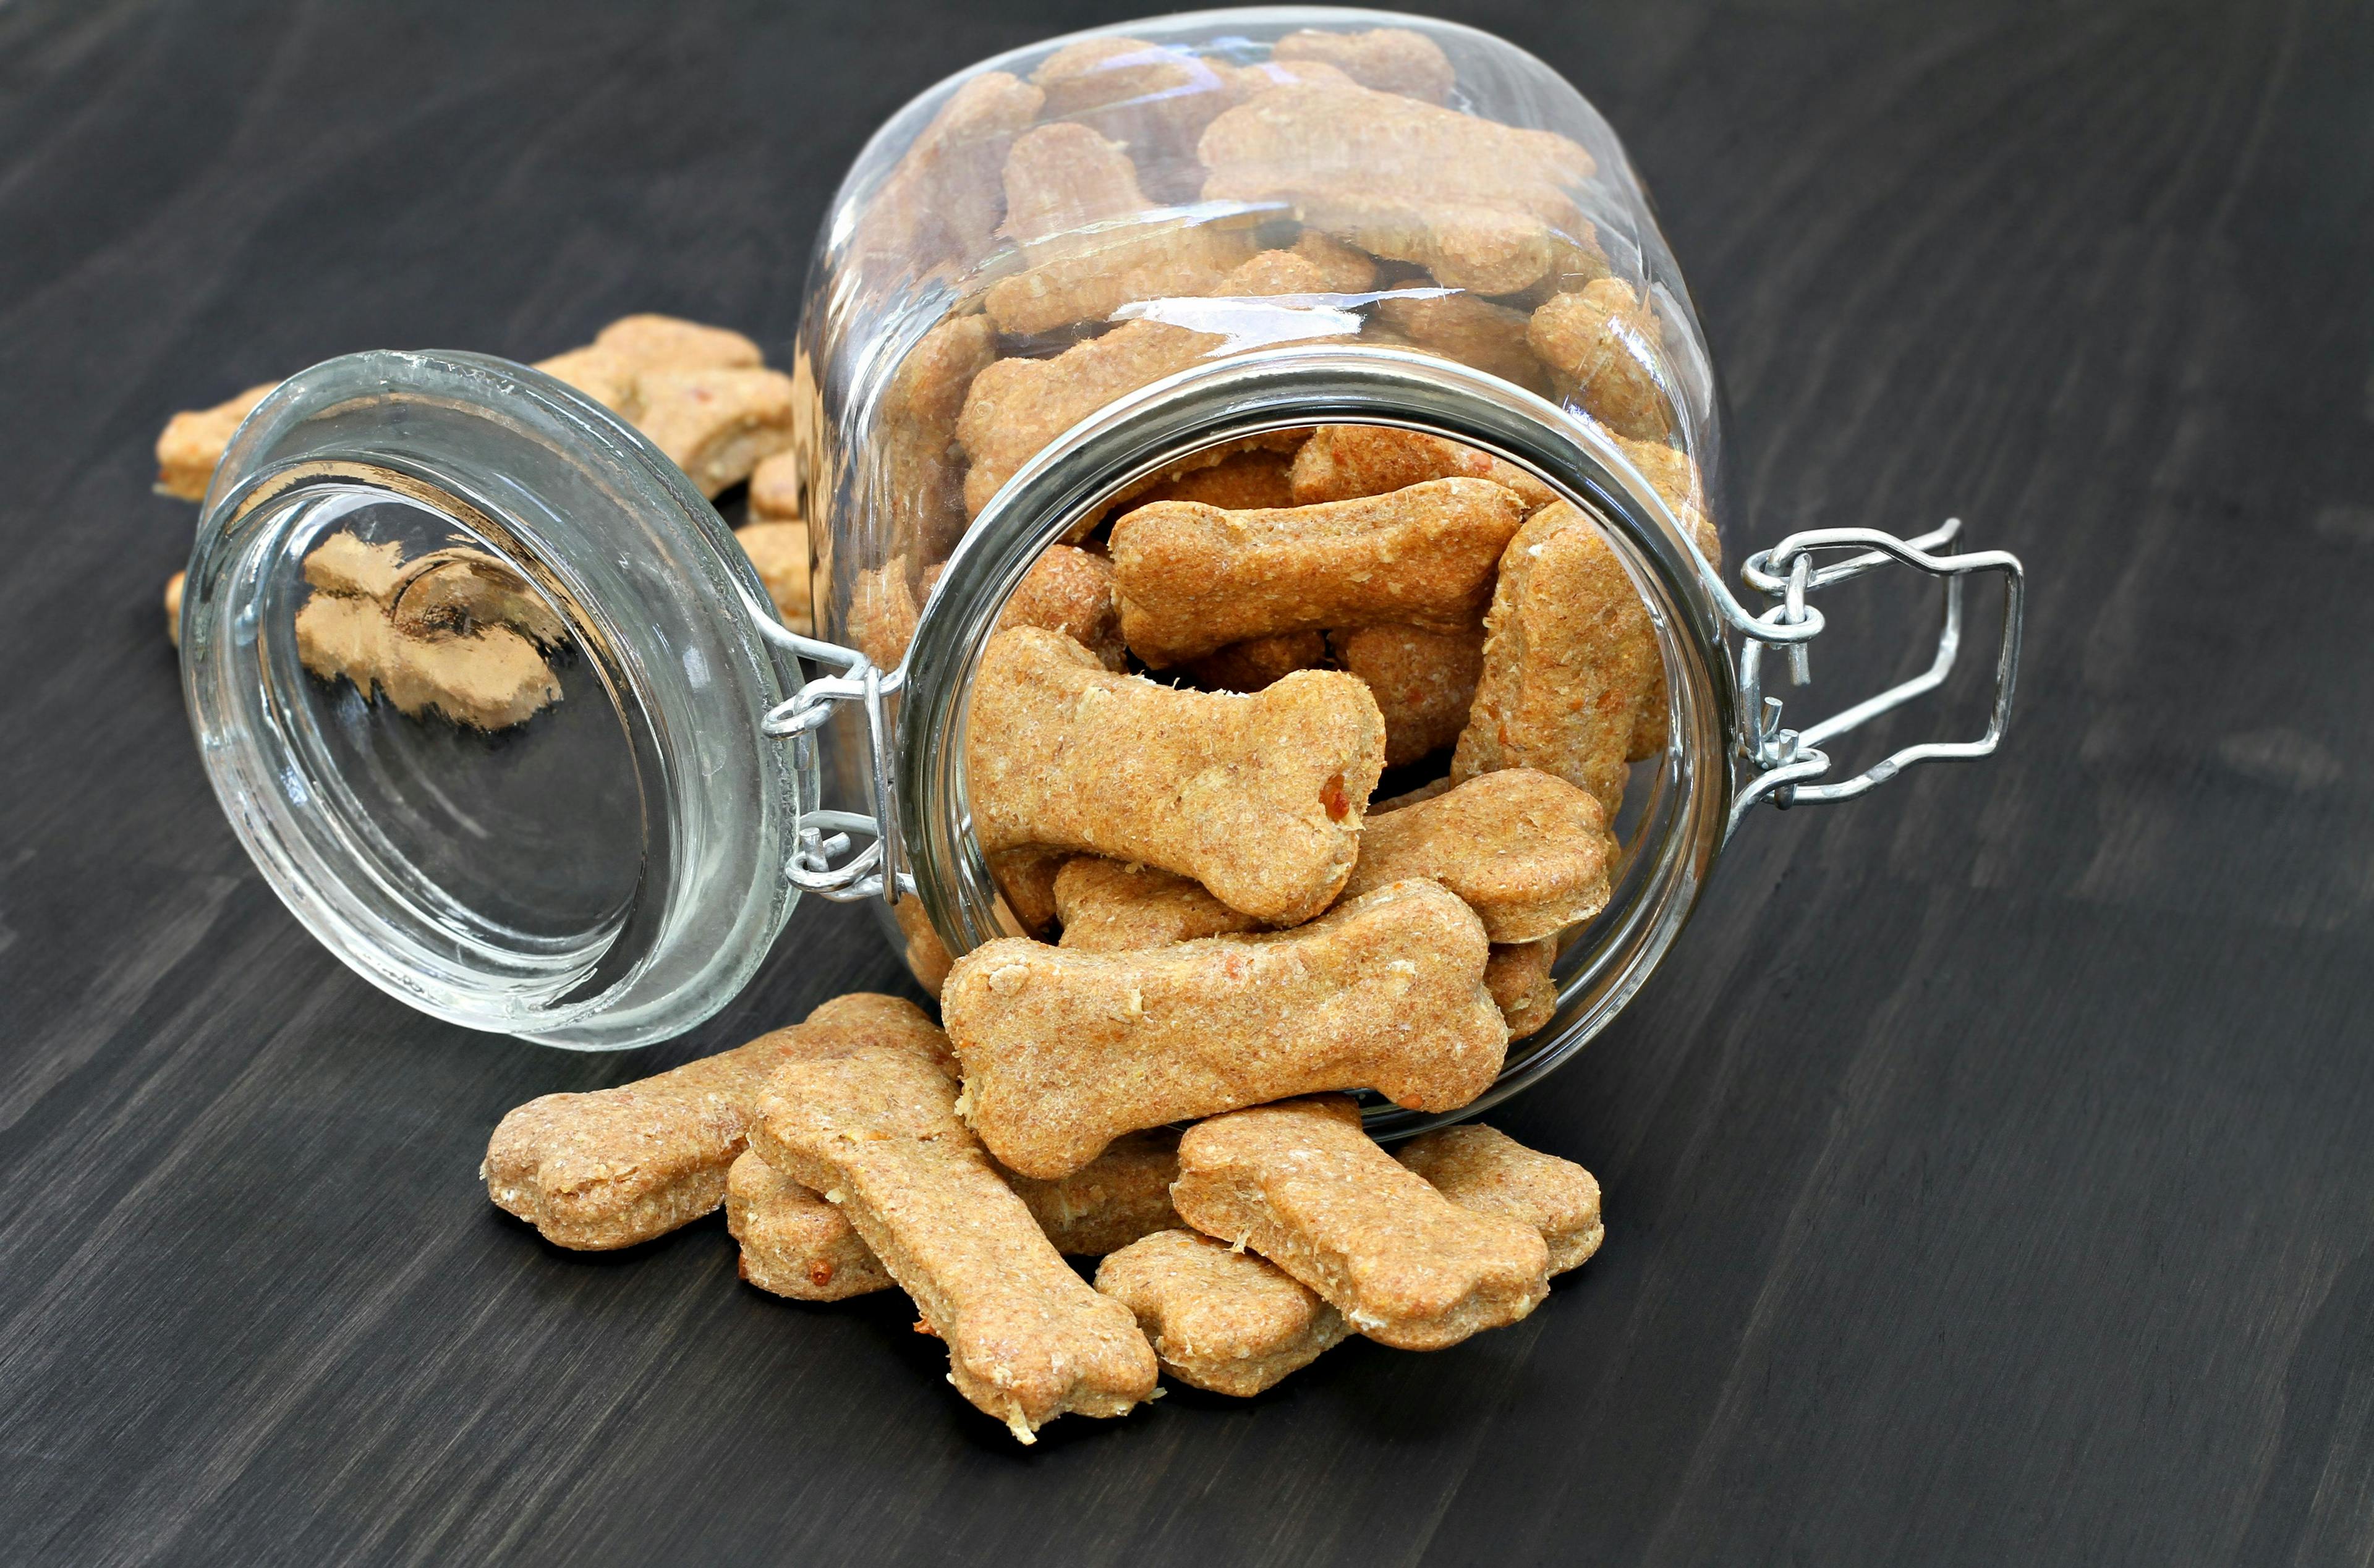 Feeding design trial for cultivated meat dog treats to be submitted to FDA for approval